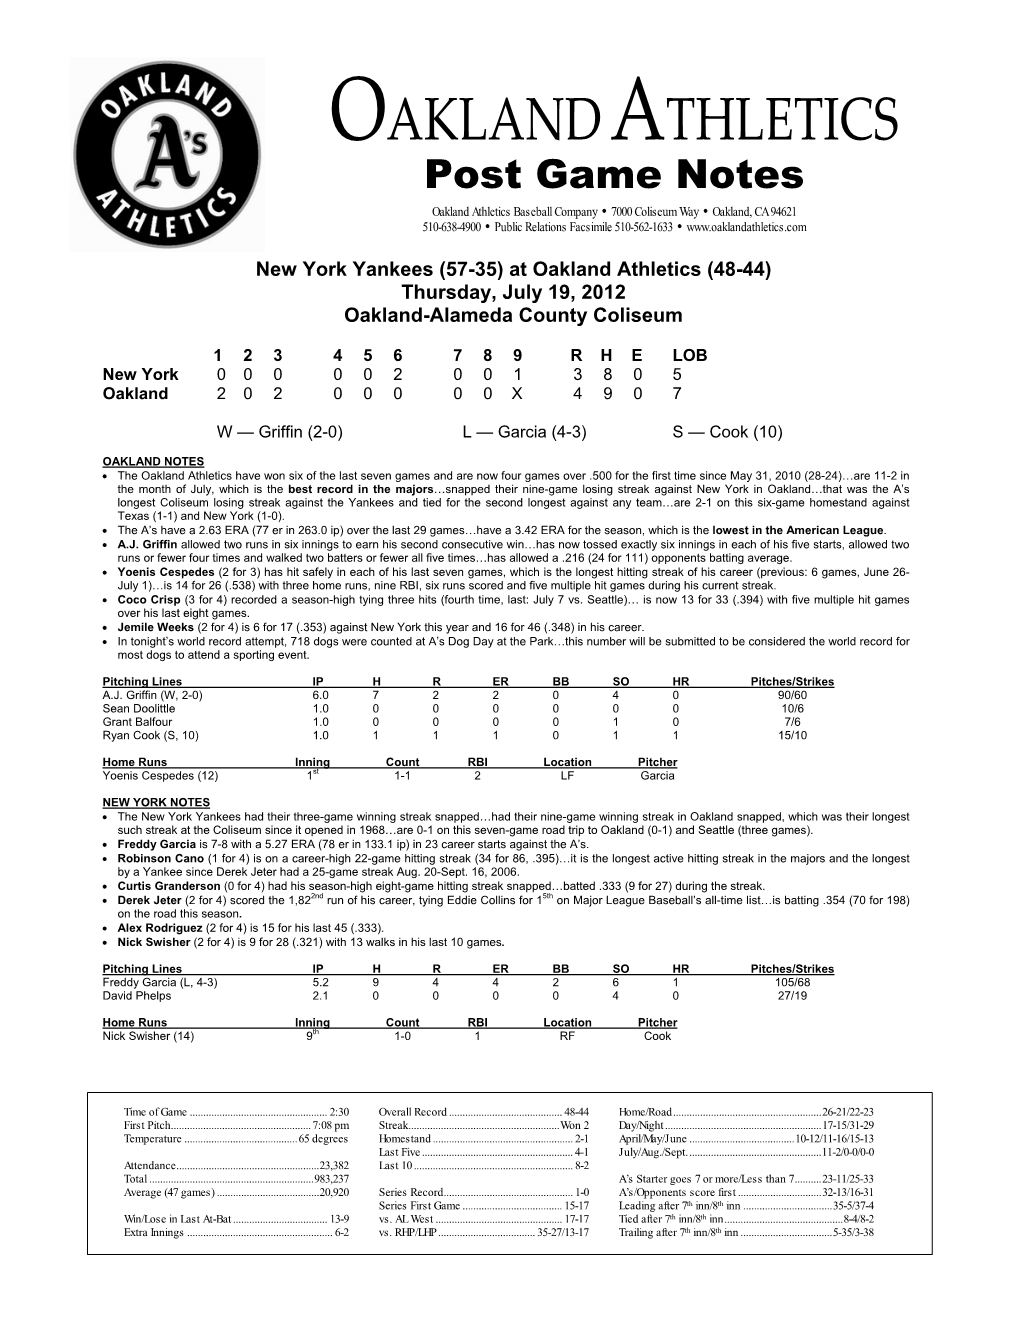 OAKLAND ATHLETICS Post Game Notes